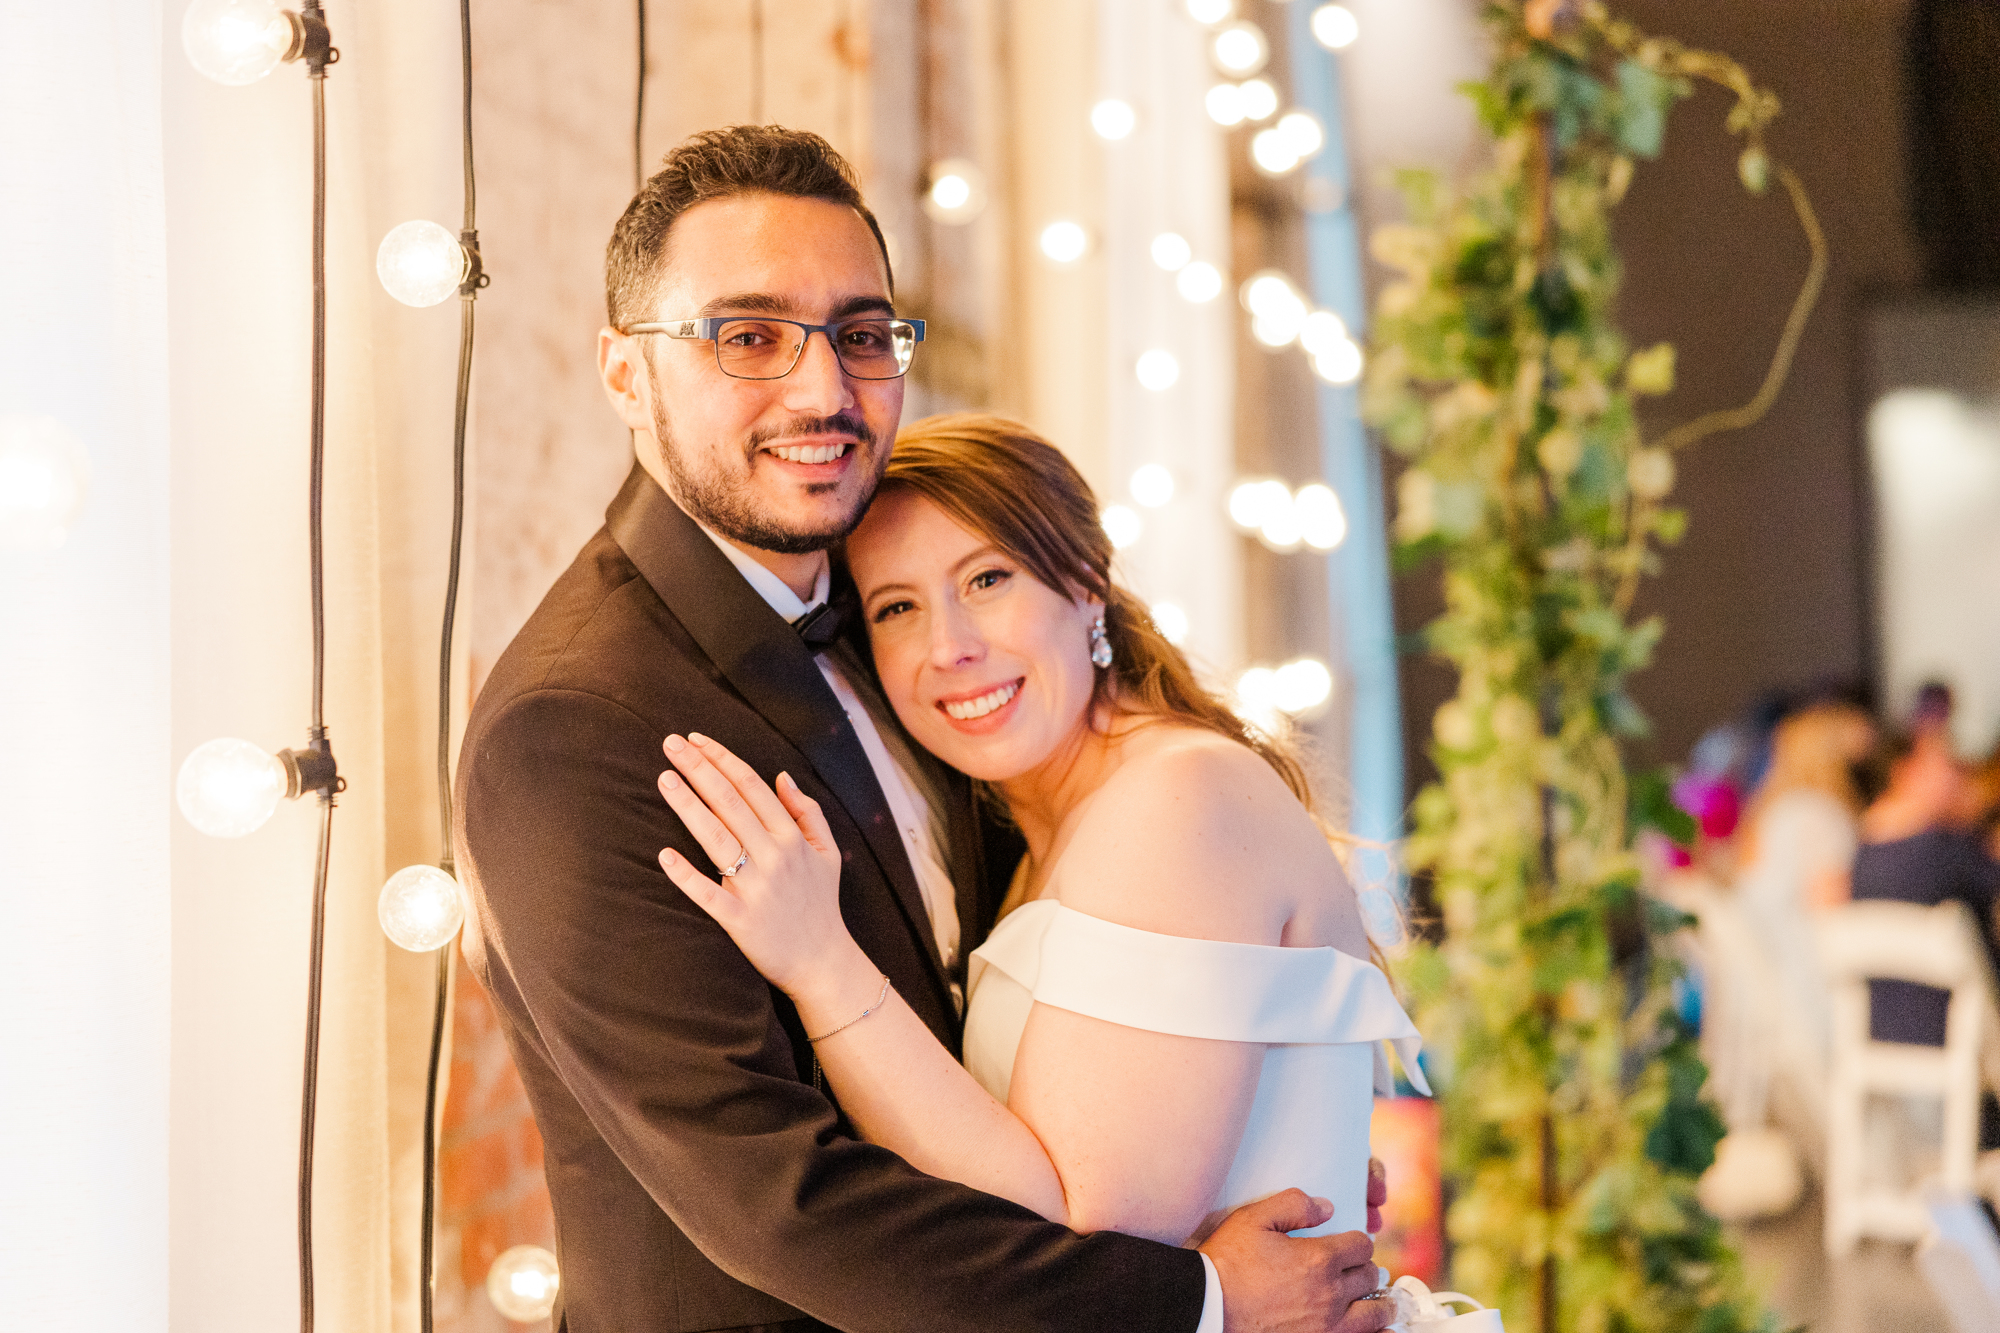 Beautiful Green Building Wedding Photography with Rustic Elements